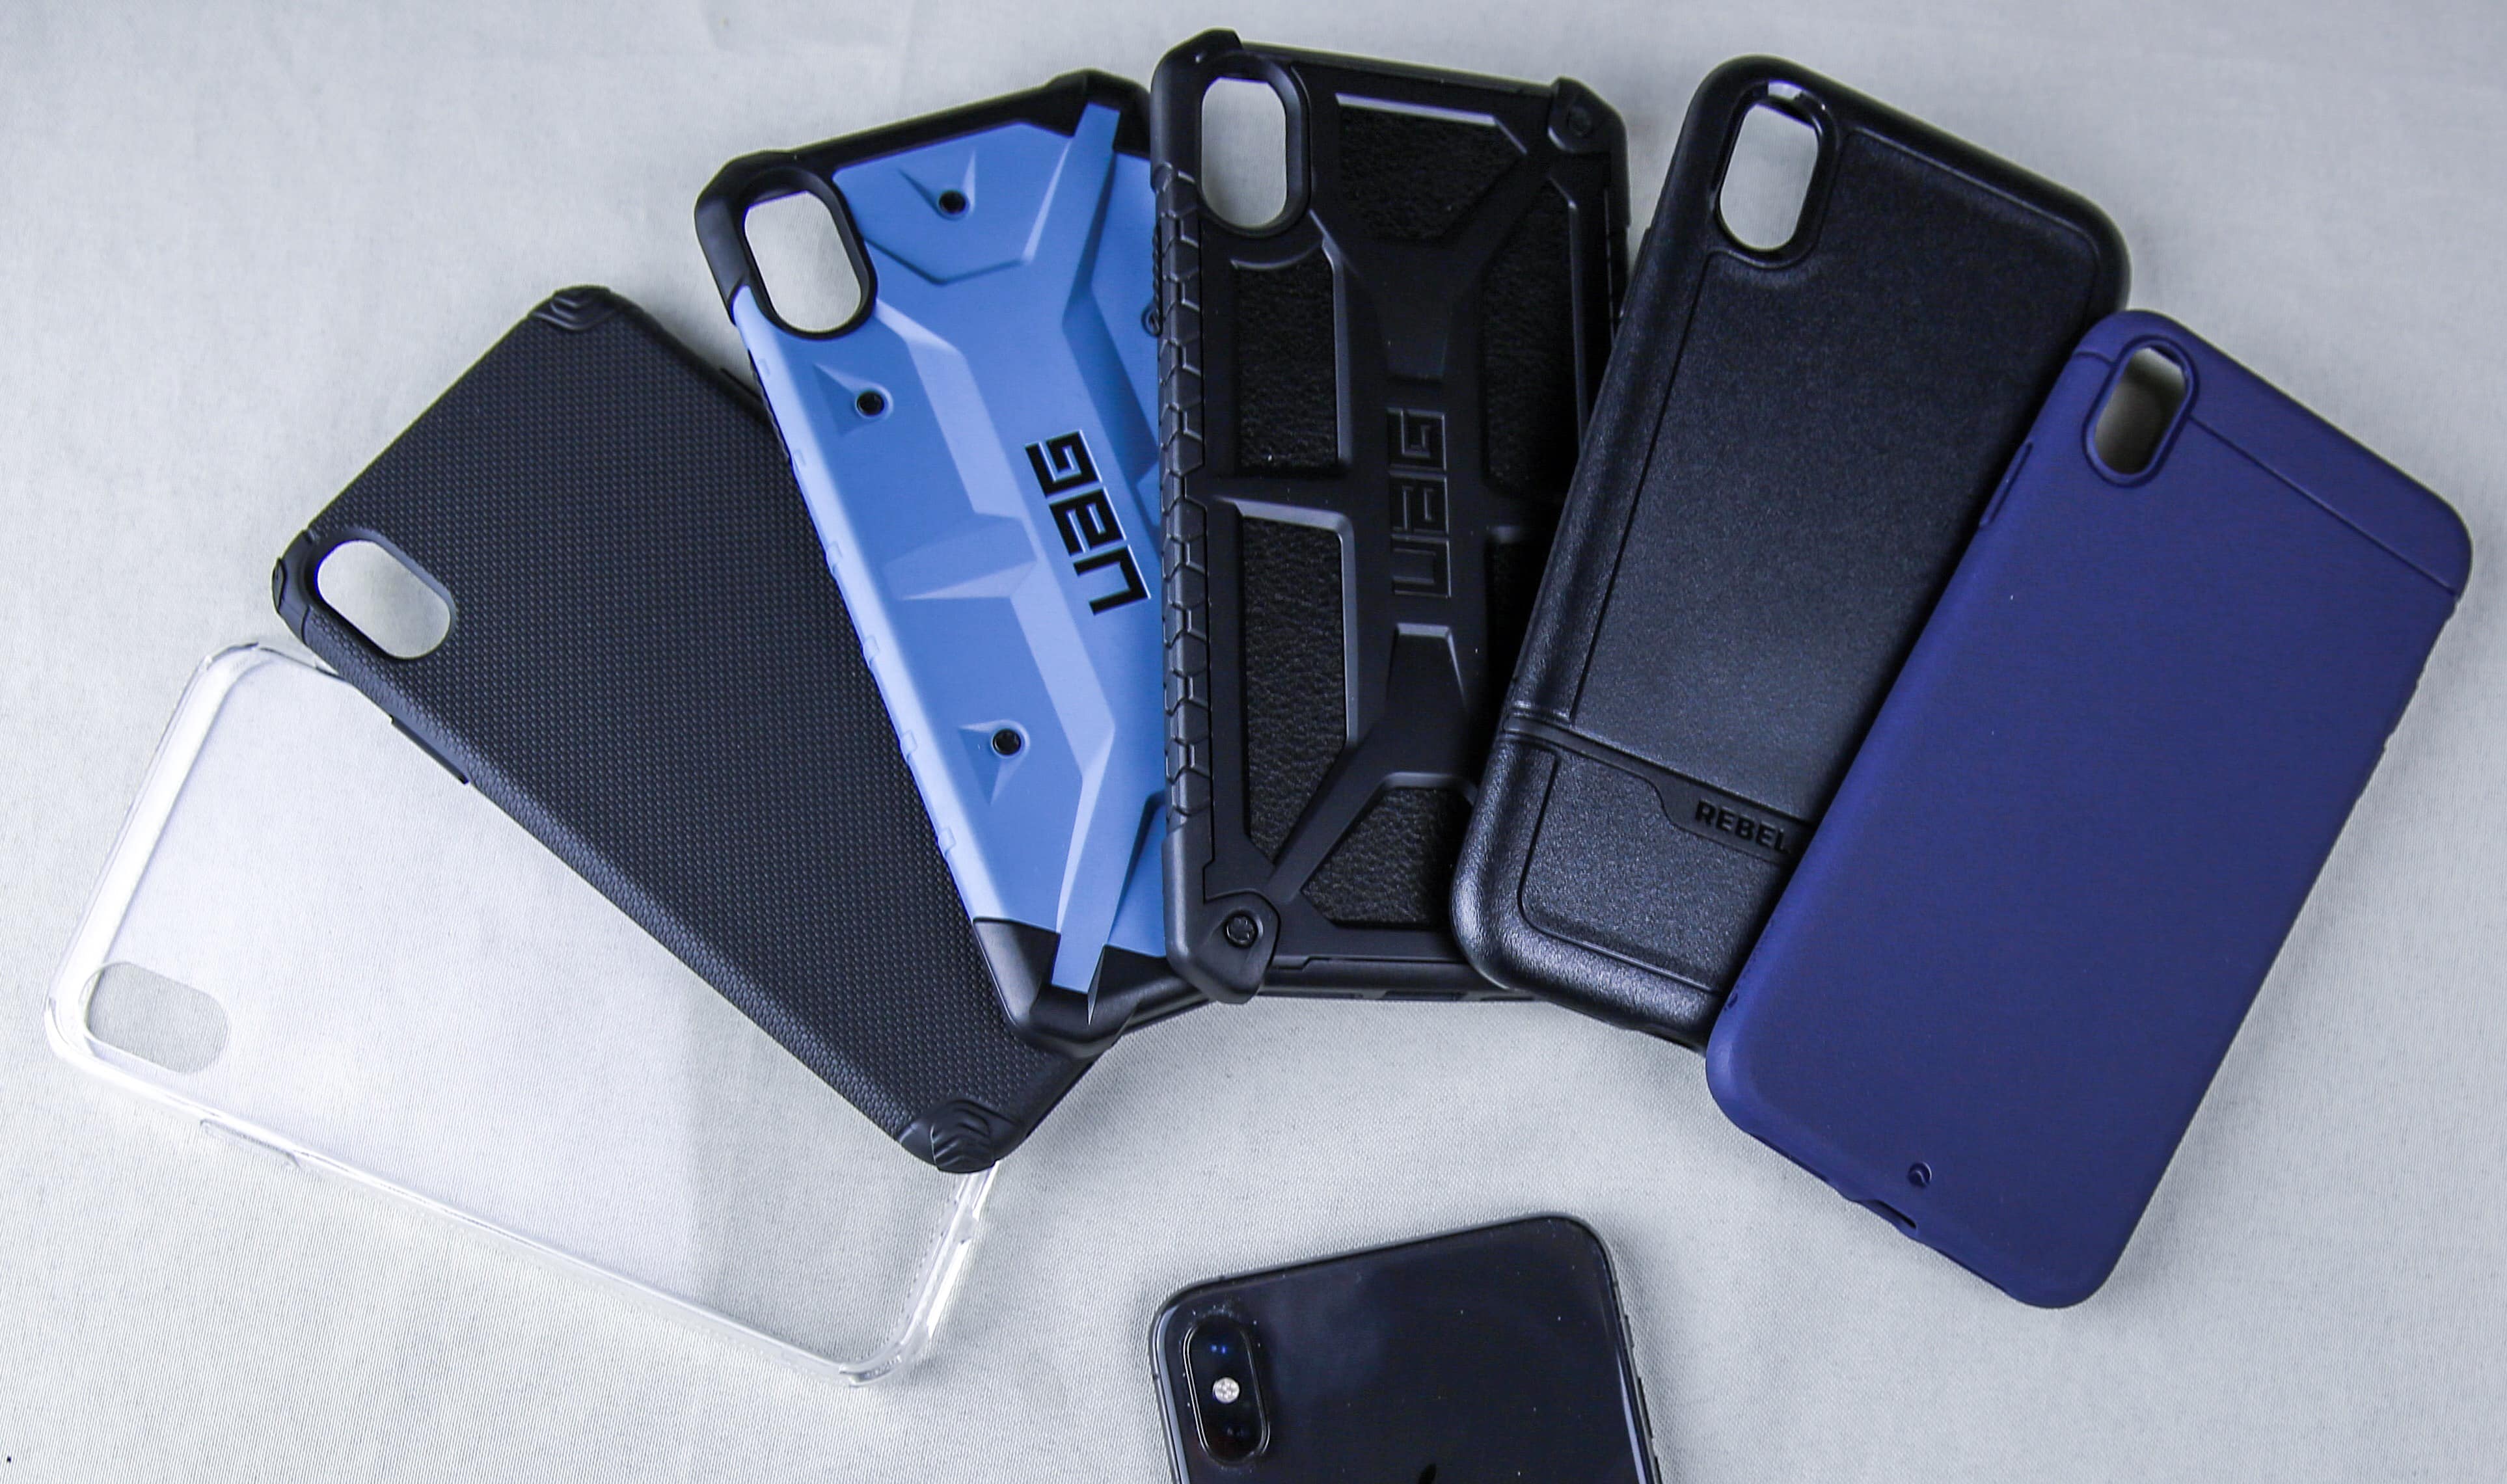 Worth a whopping $200-plus, this bulletproof bundle could be yours for free in our iPhone XS Max cases giveaway.